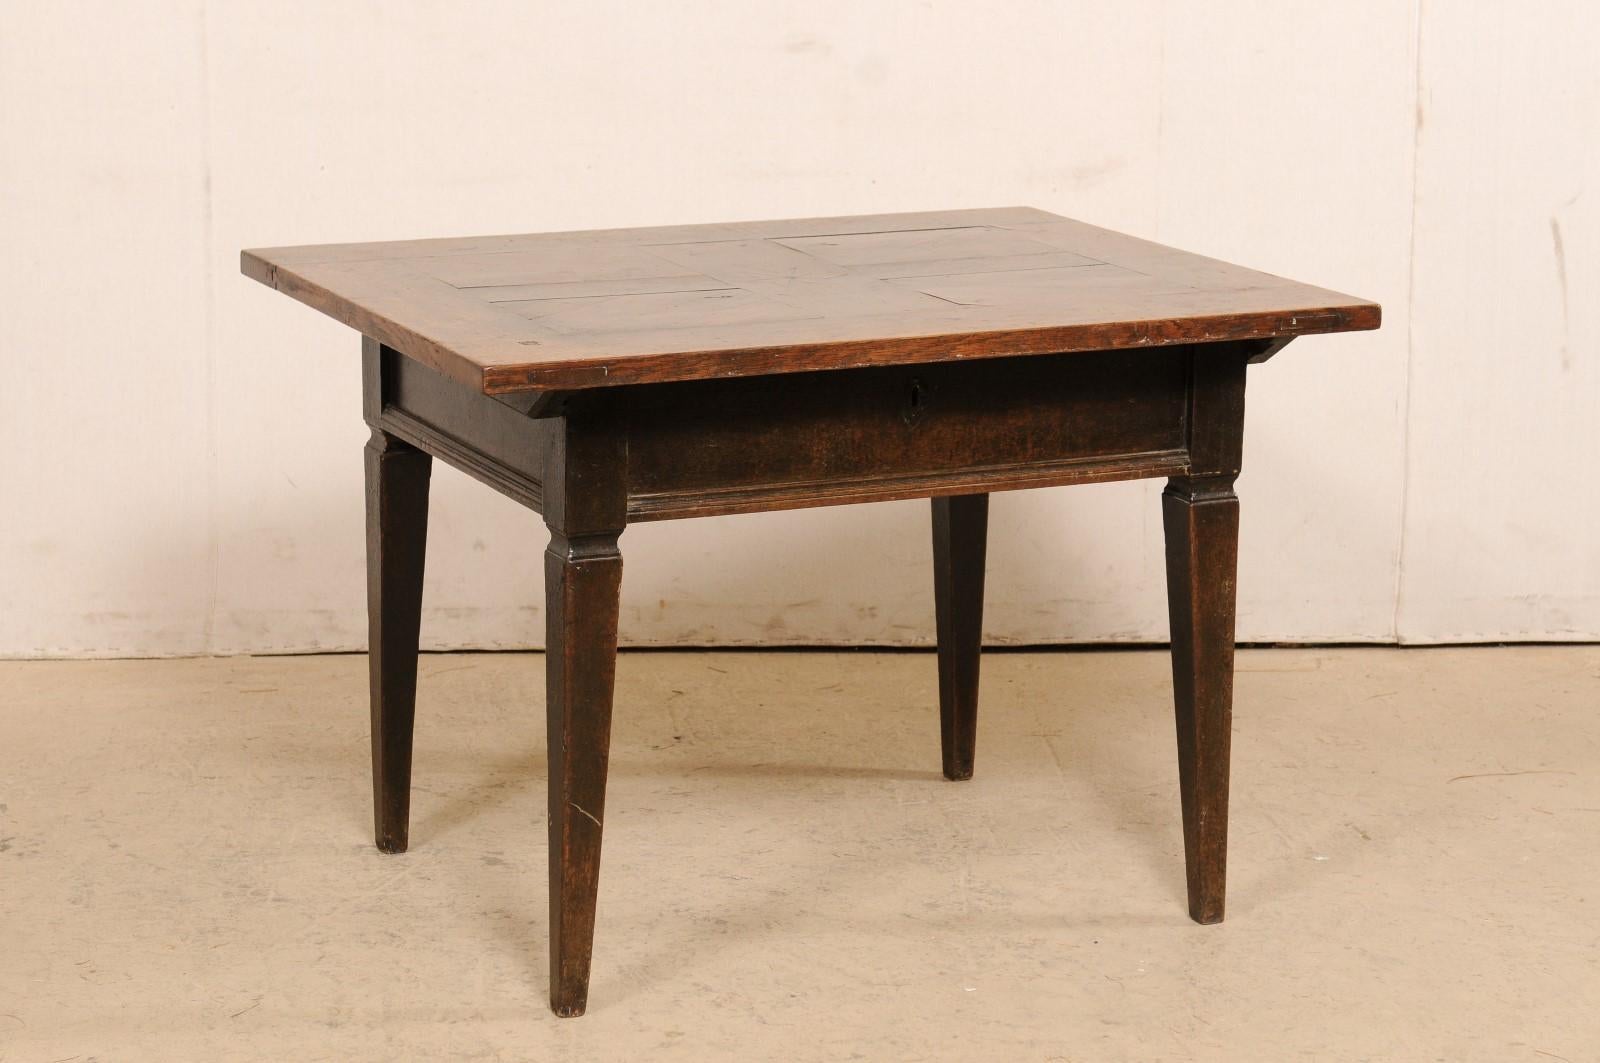 Wood 18th C. French Occasional Table w/ Star Accent Medallion Inlay at Top For Sale